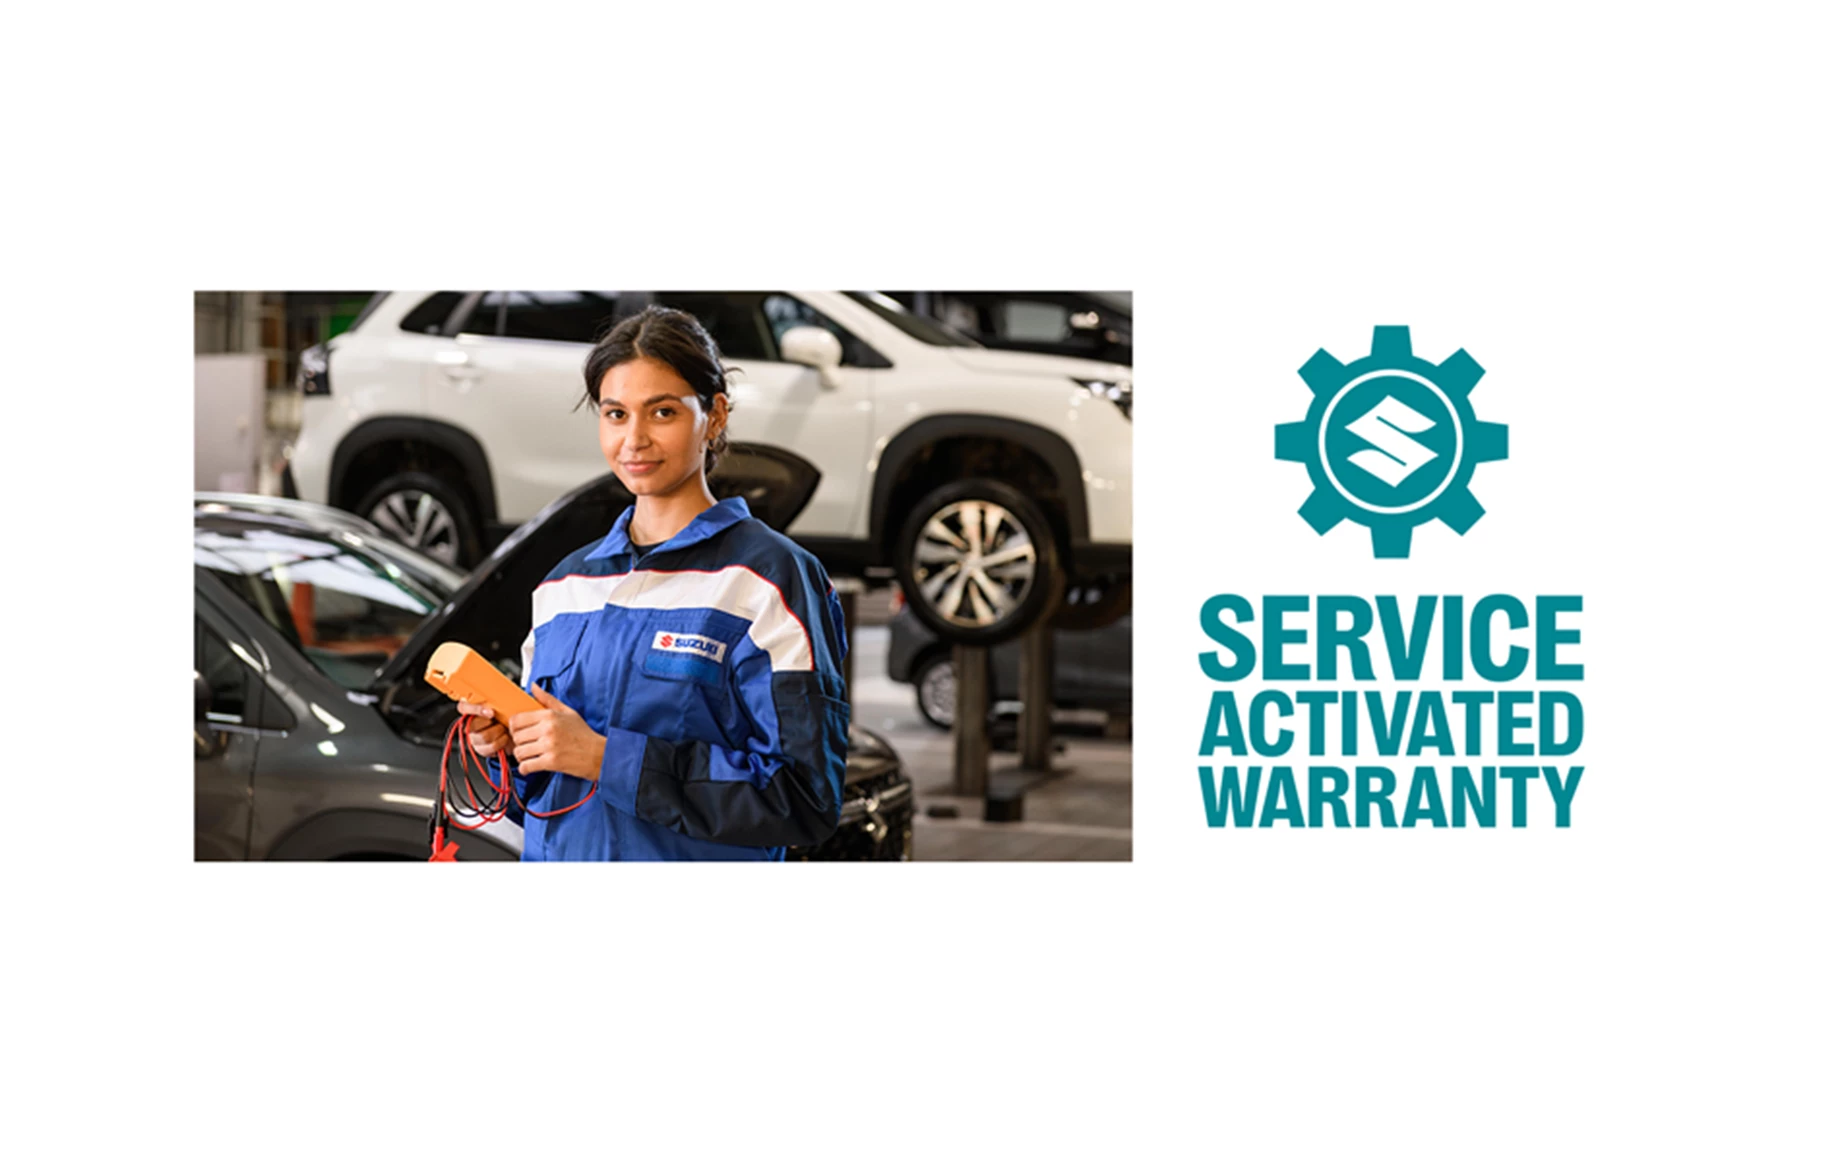 Engineer next to Service Activated Warranty logo